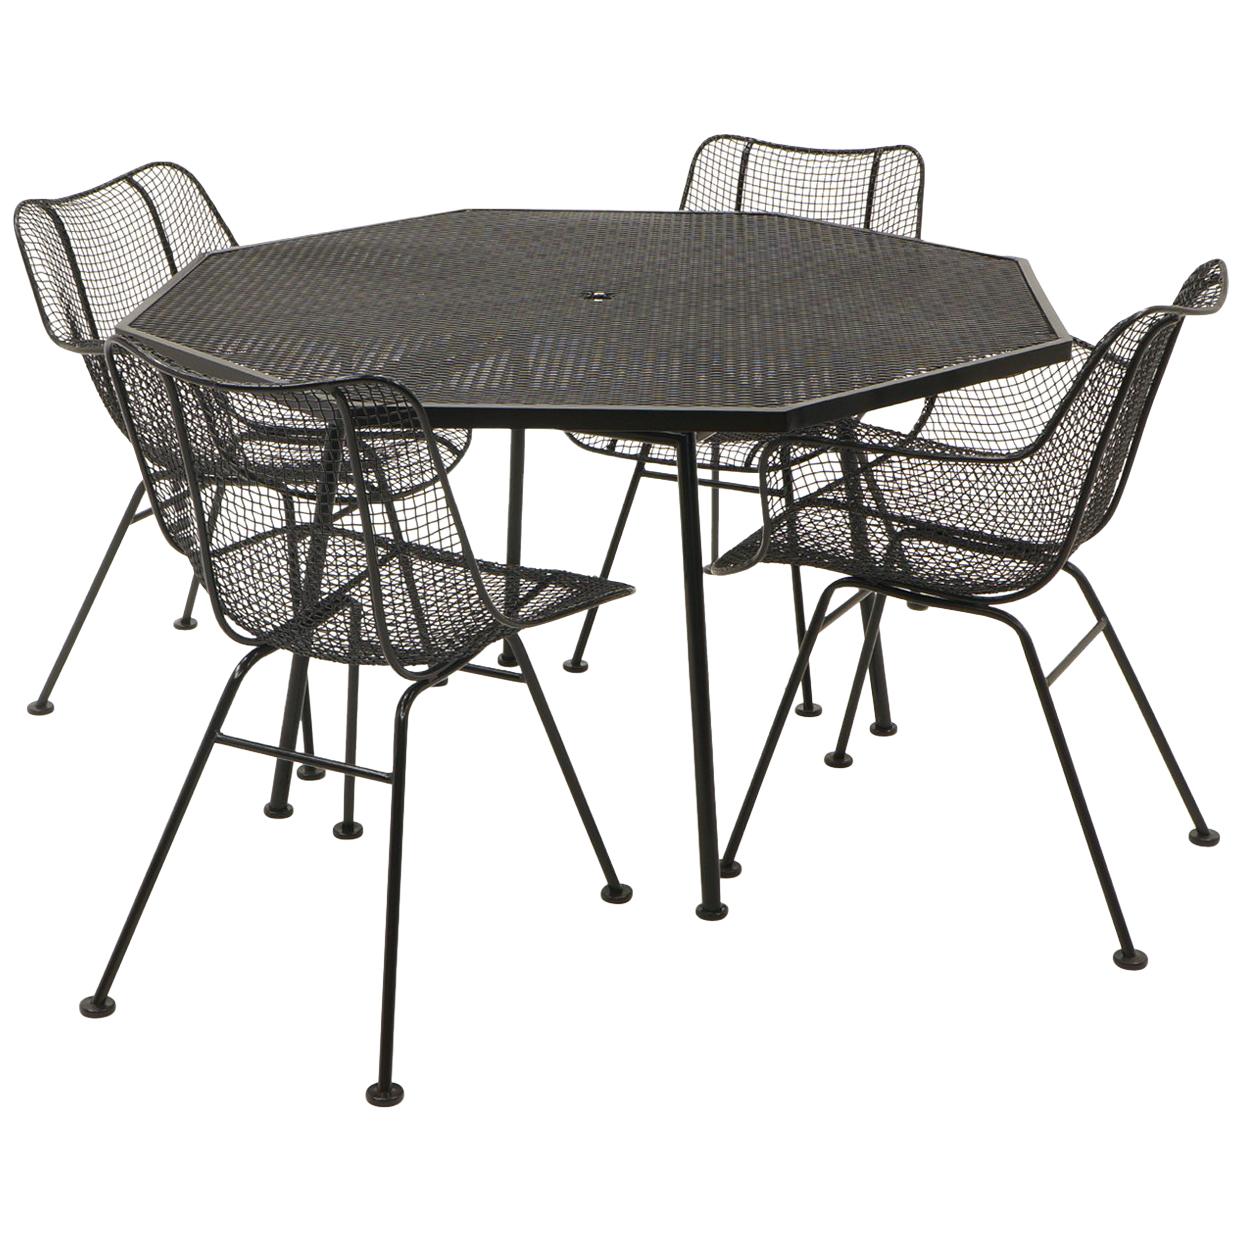 Russell Woodard Sculptura Outdoor/Patio Dining Set, Octagonal Table Four Chairs